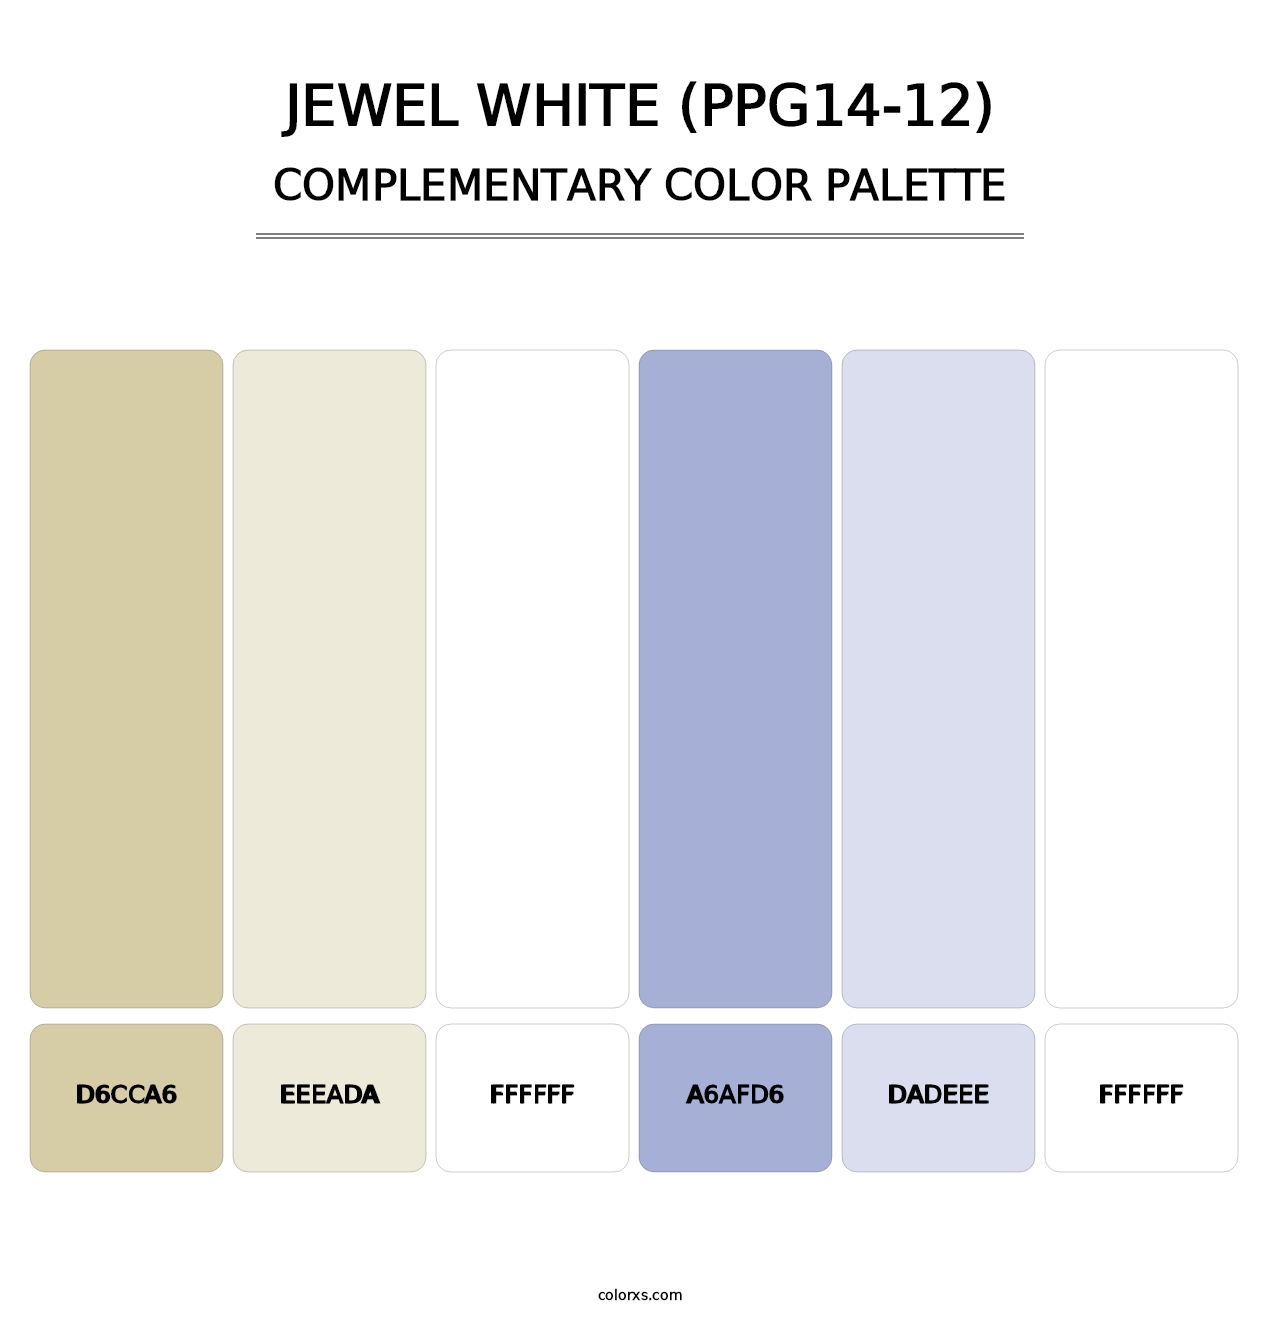 Jewel White (PPG14-12) - Complementary Color Palette